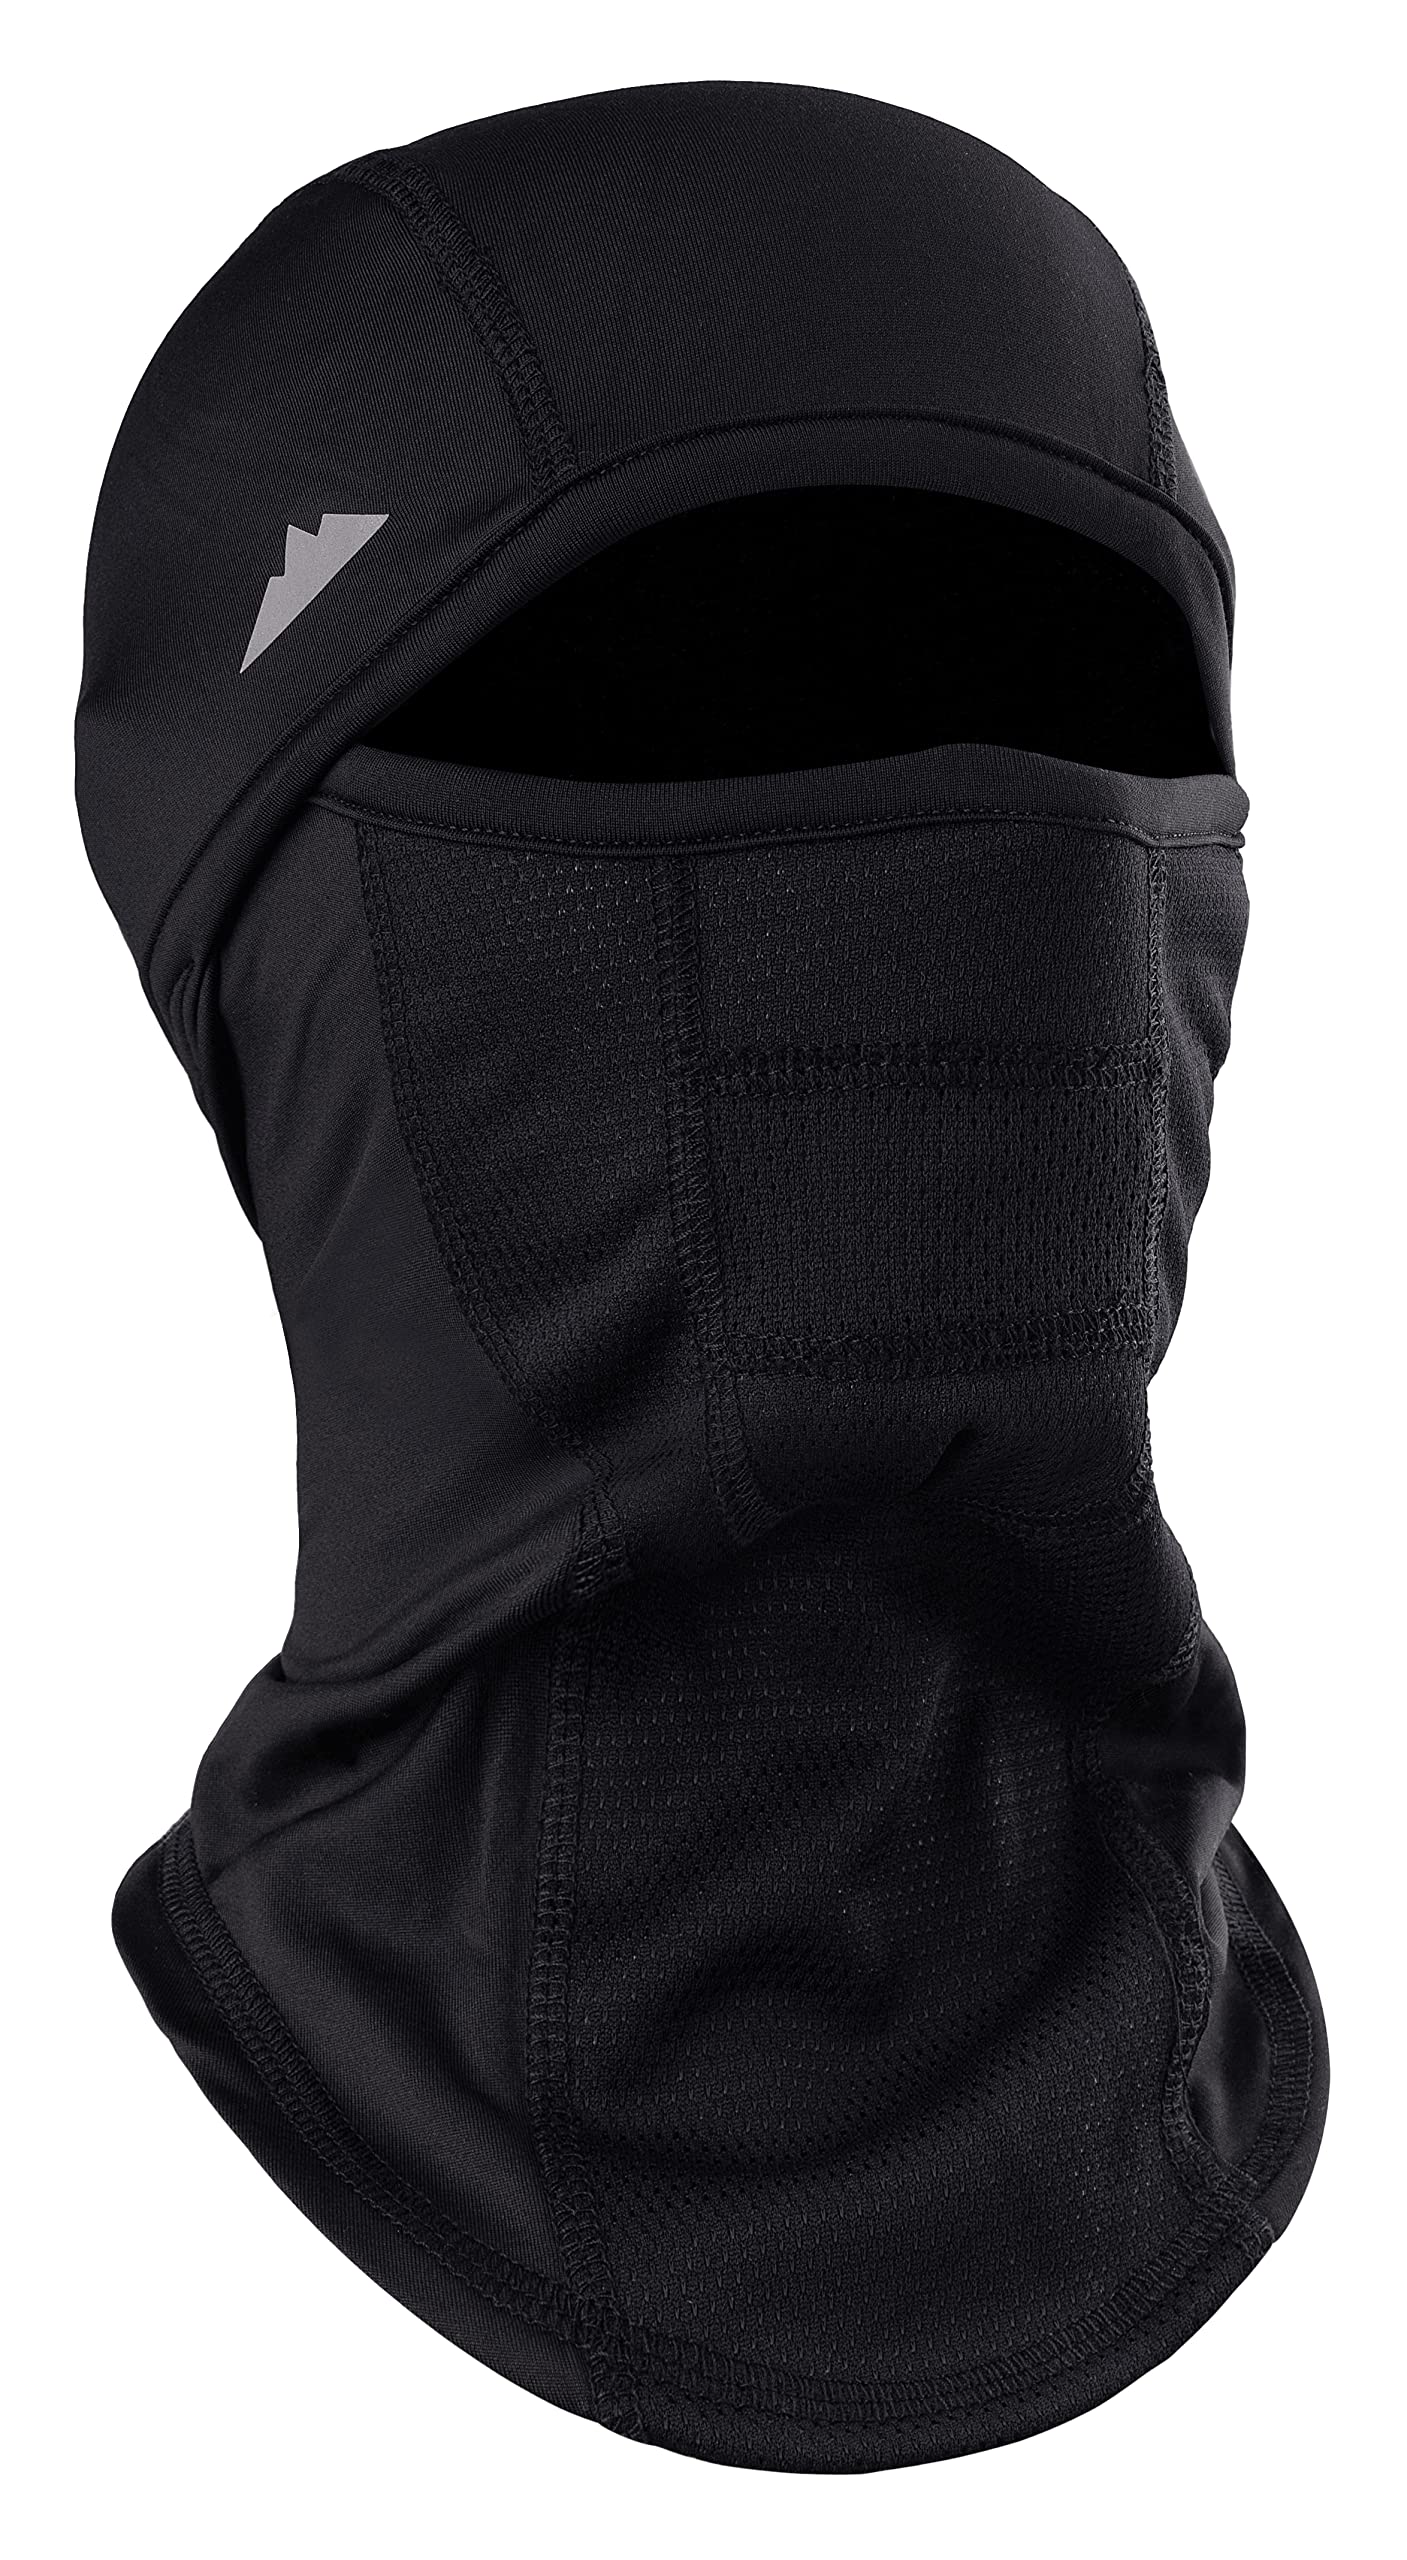 Balaclava Ski Mask - Winter Face Mask for Men & Women - Cold Weather Gear for Skiing, Snowboarding & Motorcycle Riding